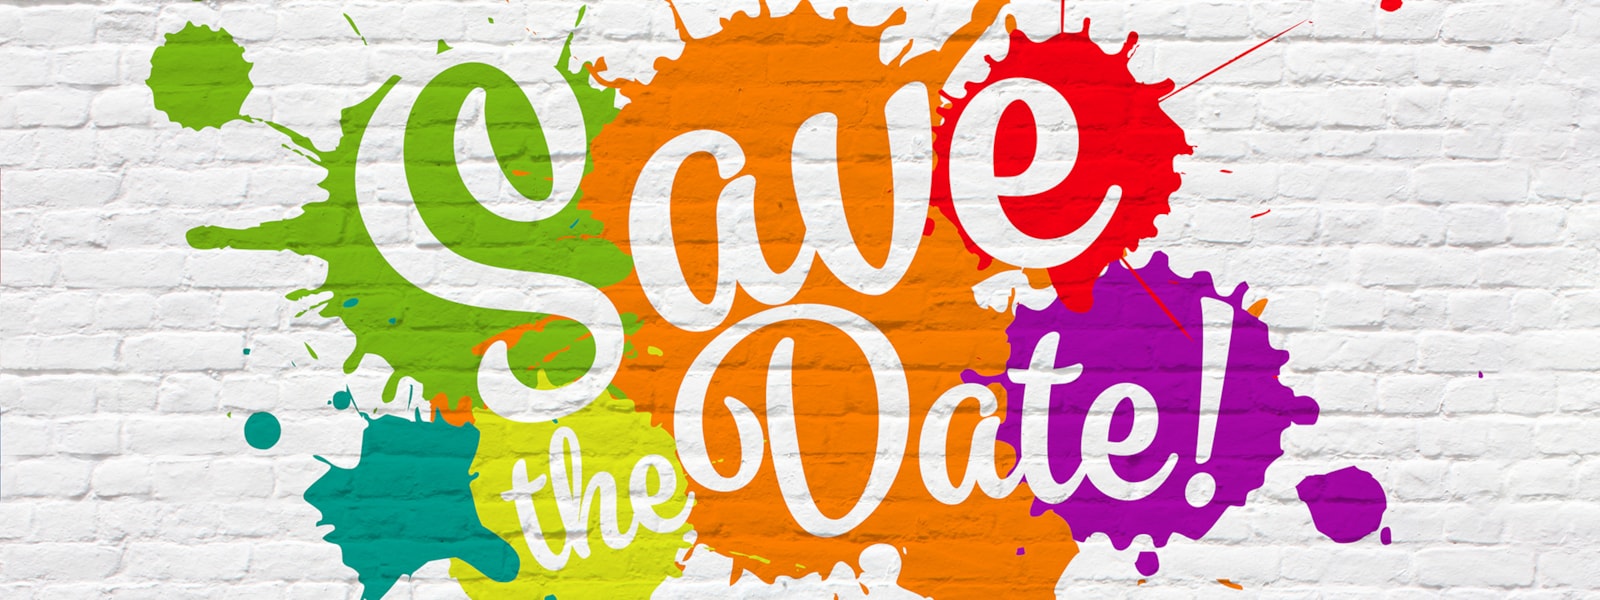 Save The Date painted on a wall